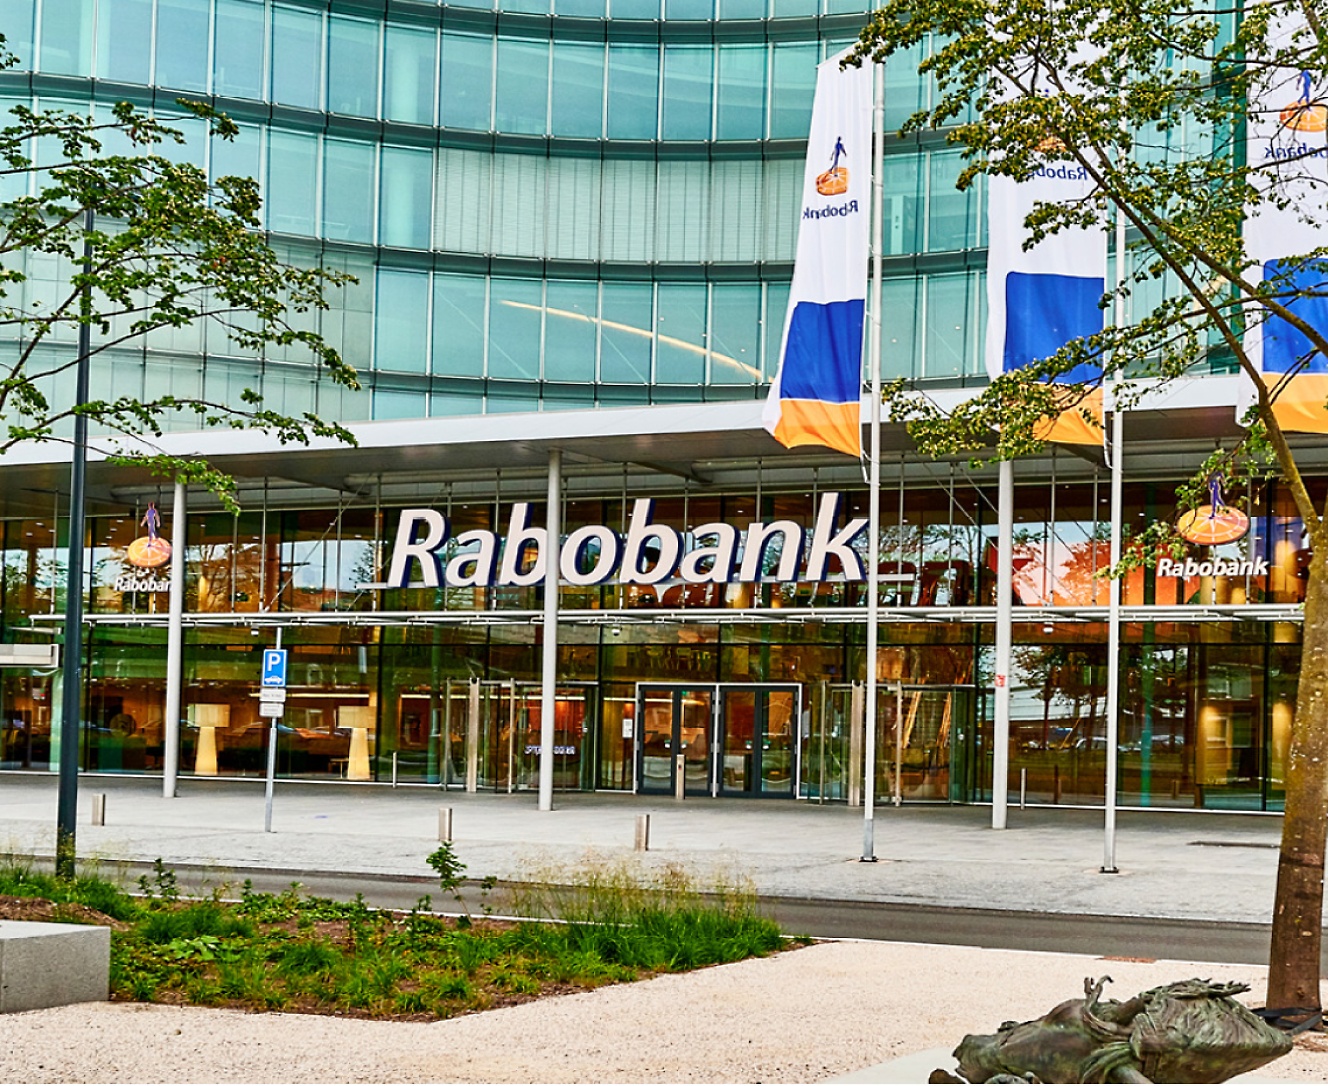 A building showing Rabobank written on top of it